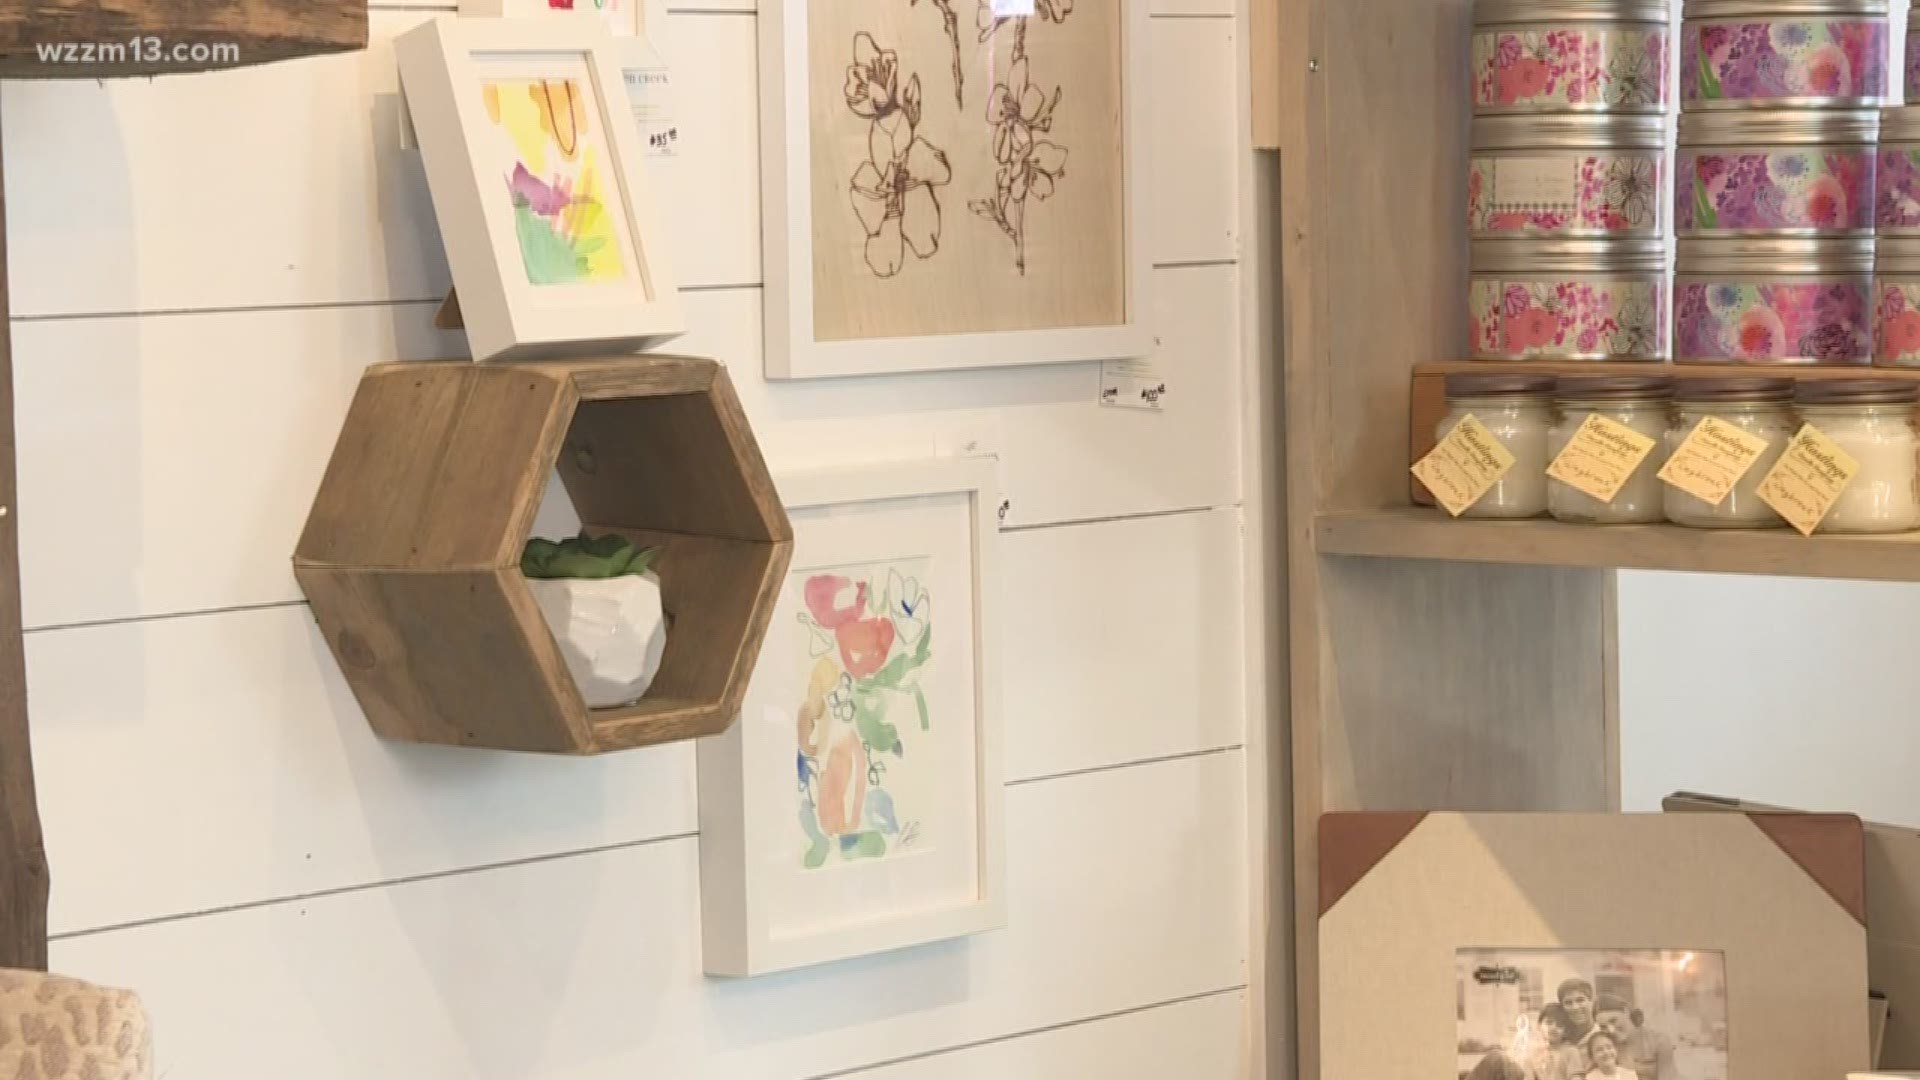 Local makers come together for a different kind of market this weekend.